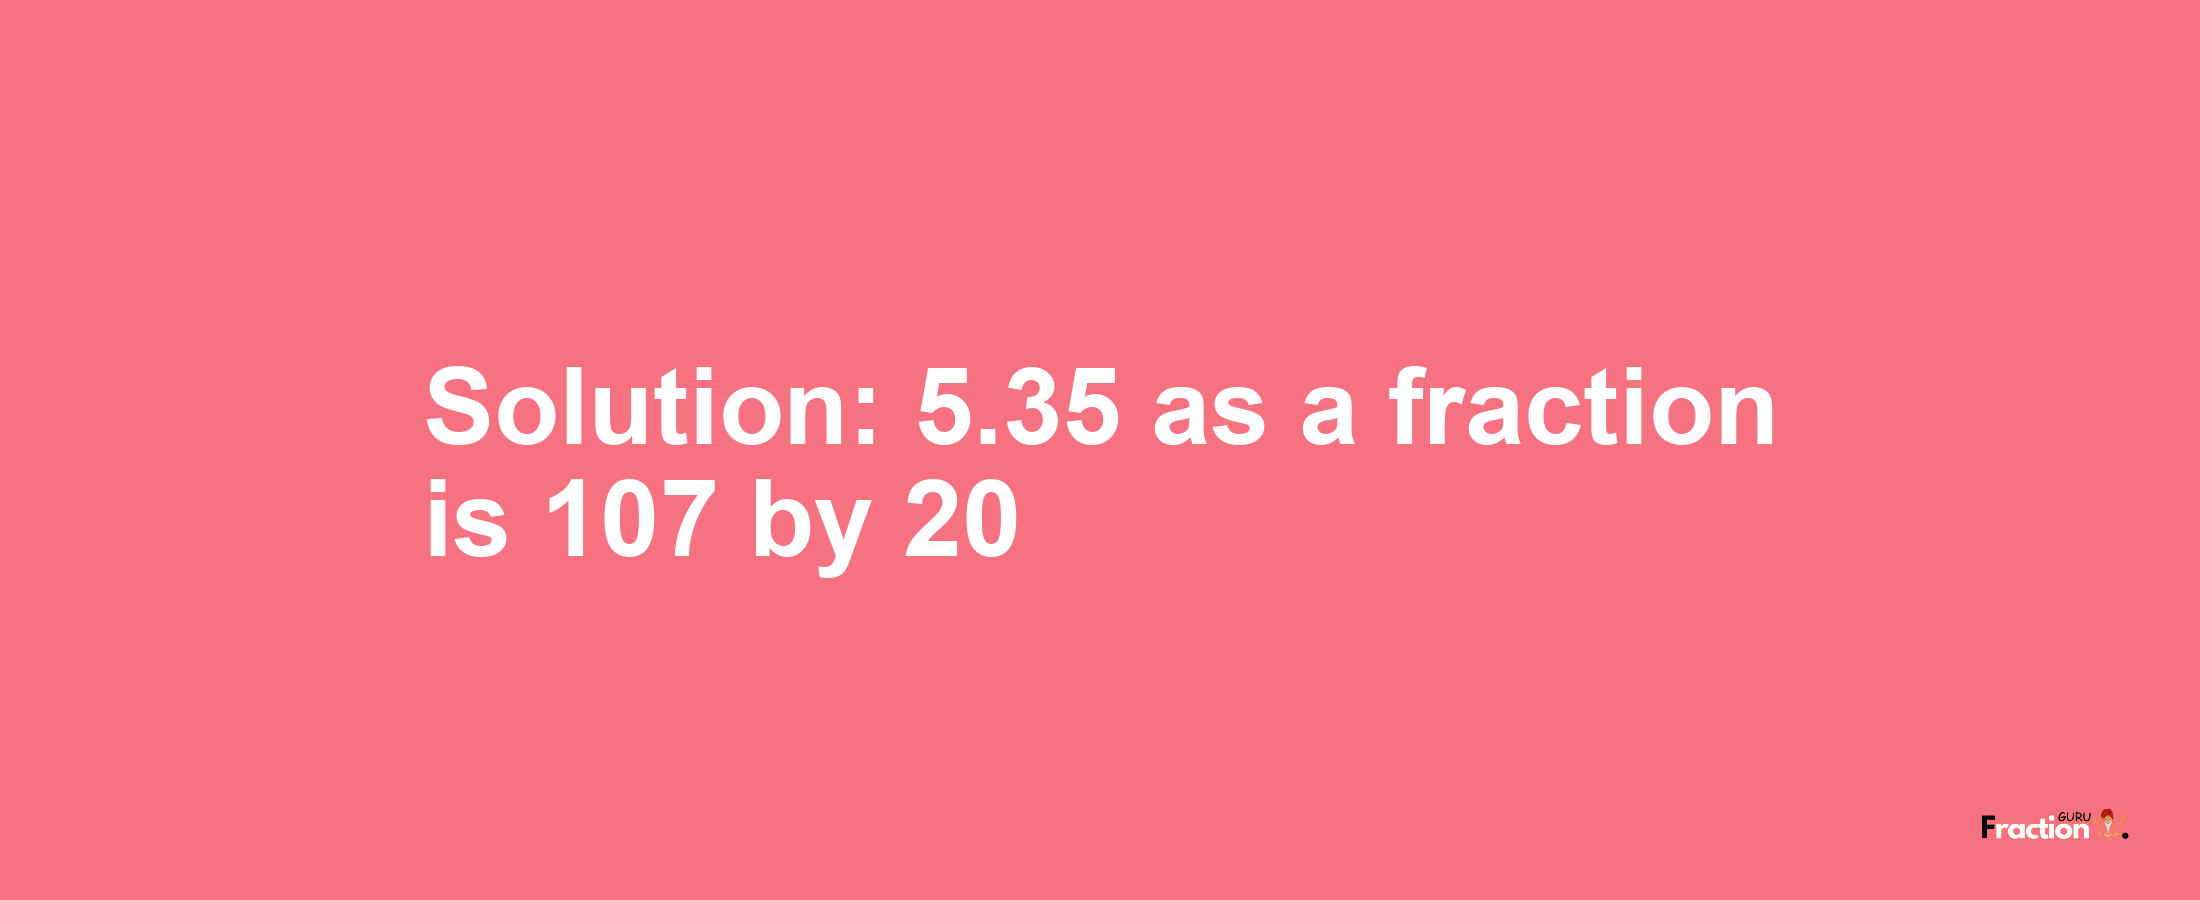 Solution:5.35 as a fraction is 107/20